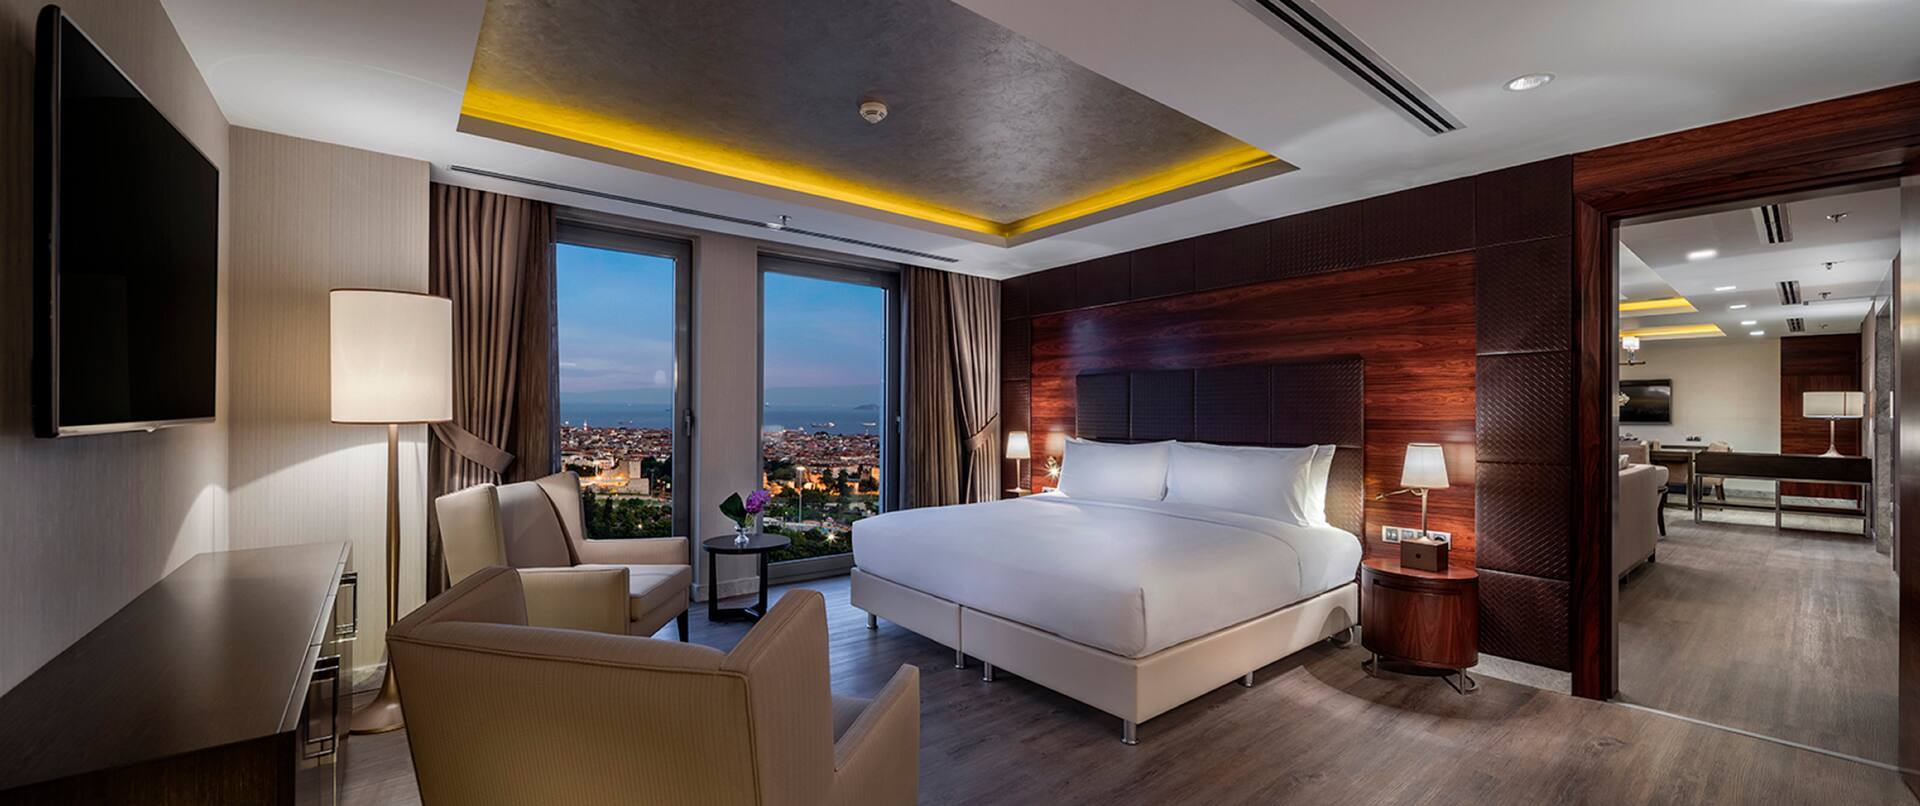 DoubleTree by Hilton Istanbul Topkapi Hotel, TR - PRESIDENTIAL SUITE